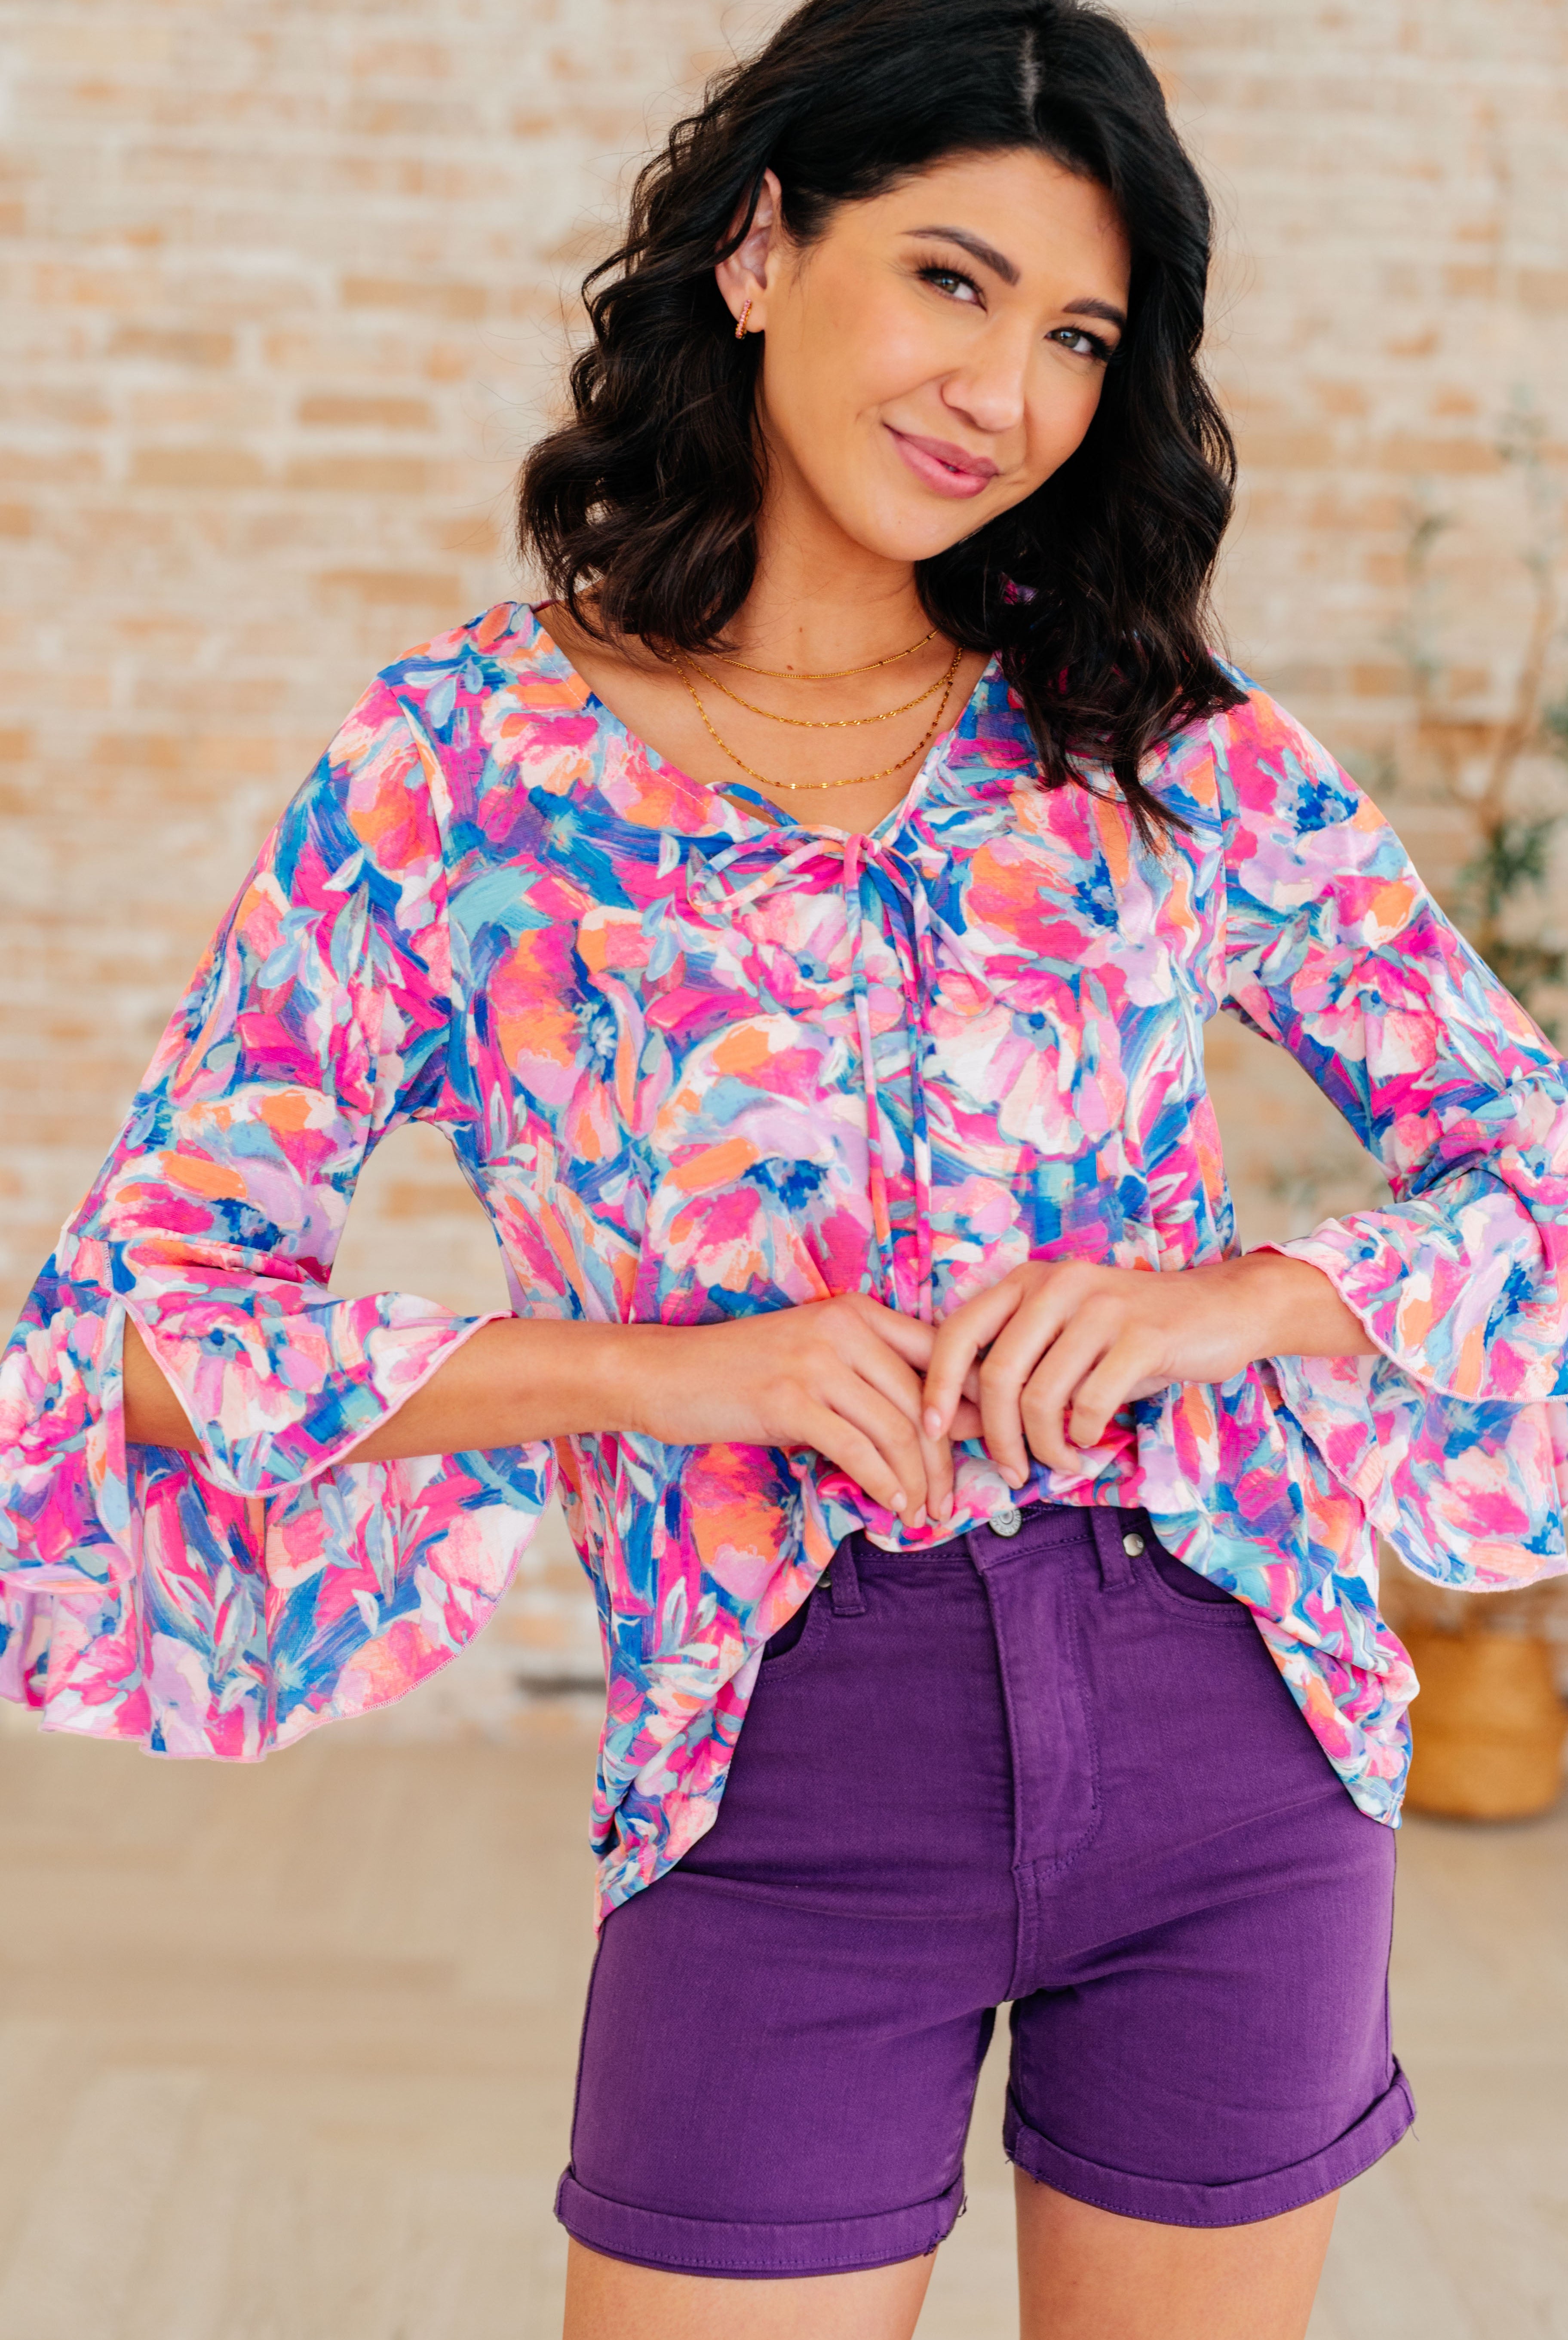 Willow Bell Sleeve Top in Royal Brushed Floral-Tops-Ave Shops-Urban Threadz Boutique, Women's Fashion Boutique in Saugatuck, MI